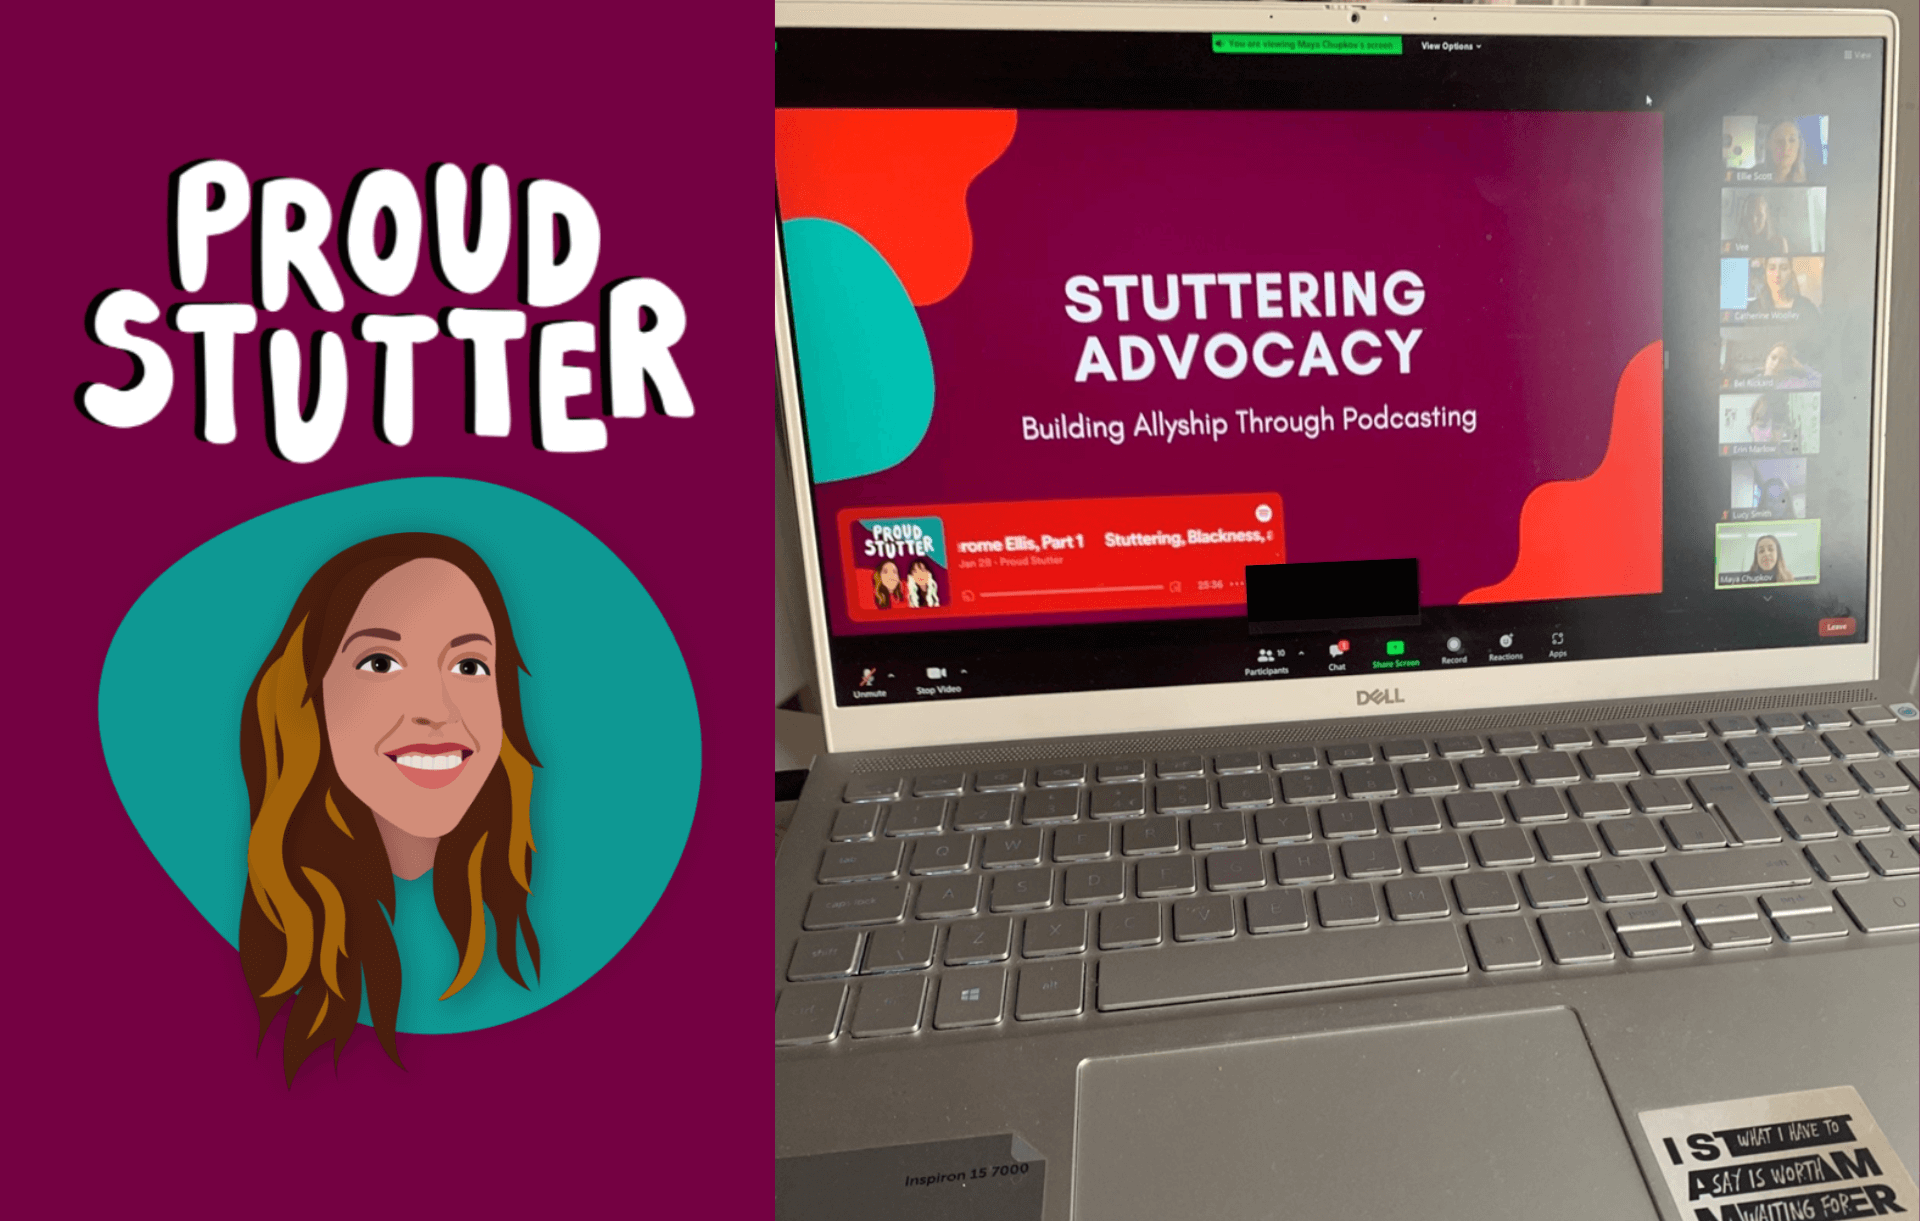 A picture of a laptop screen, with text next to it saying 'Proud Stutter' and an illustrated woman's face underneath